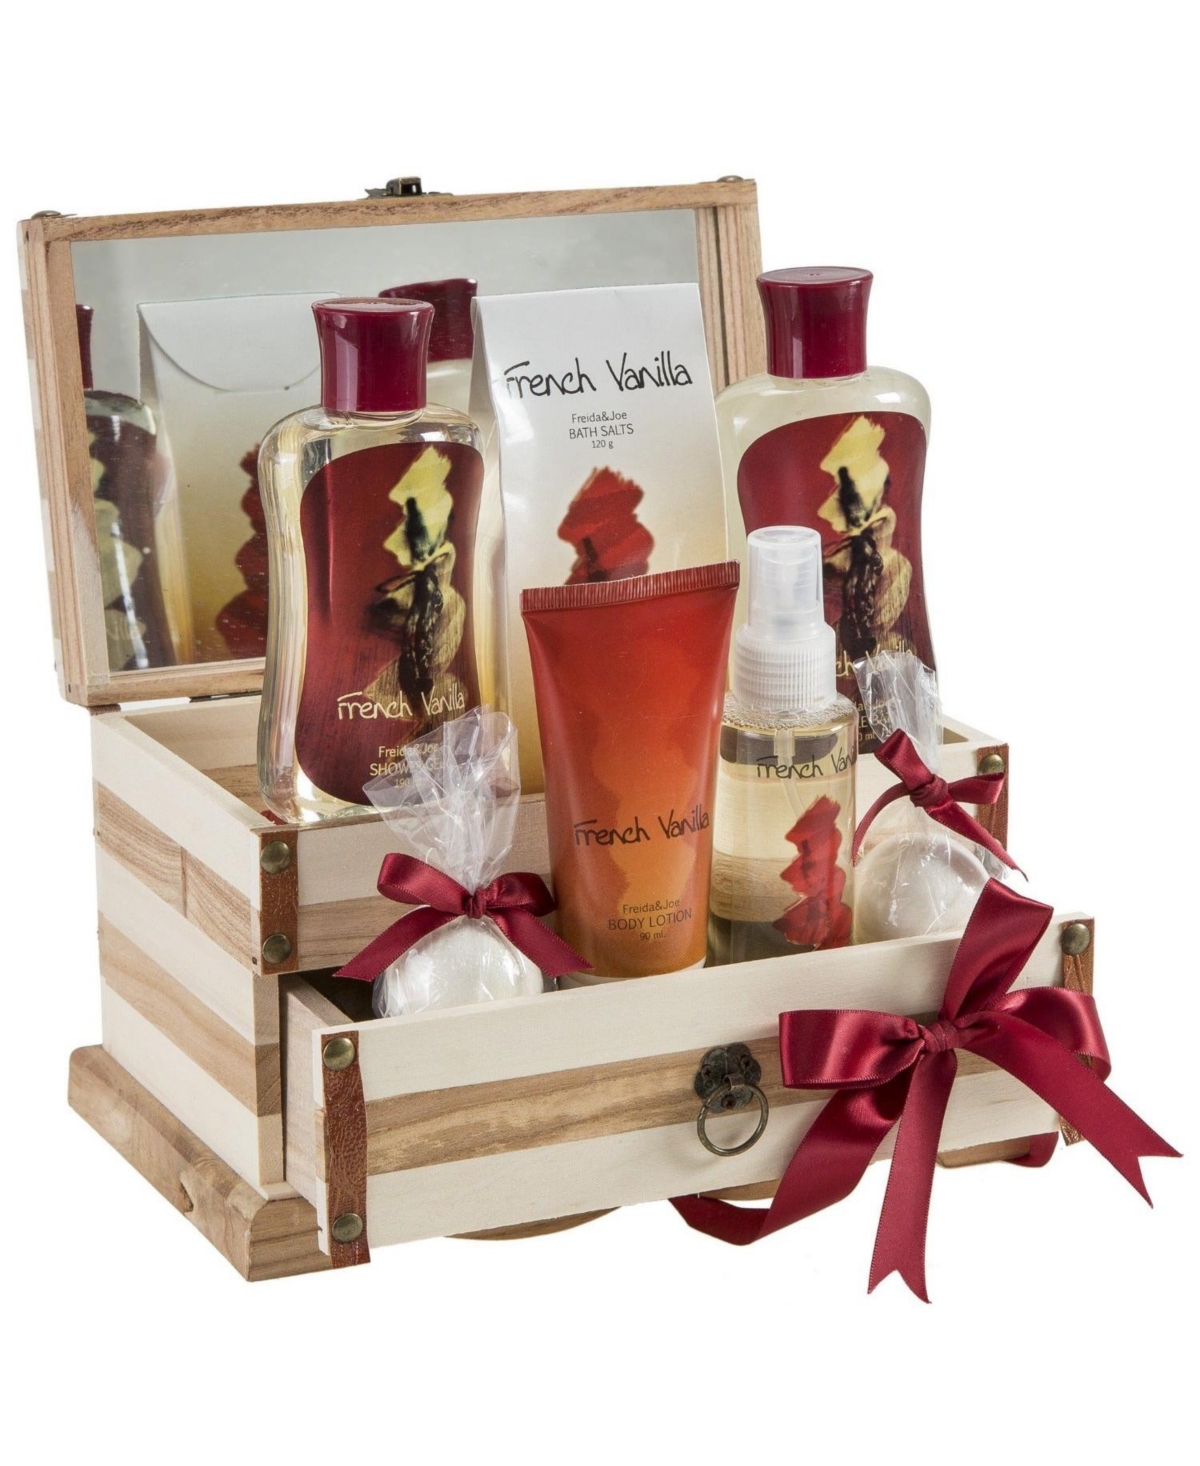 French Vanilla Fragrance Spa & Skin Care Set in a Wooden Jewelry Box Luxury Body Care Mothers Day Gifts for Mom - Red